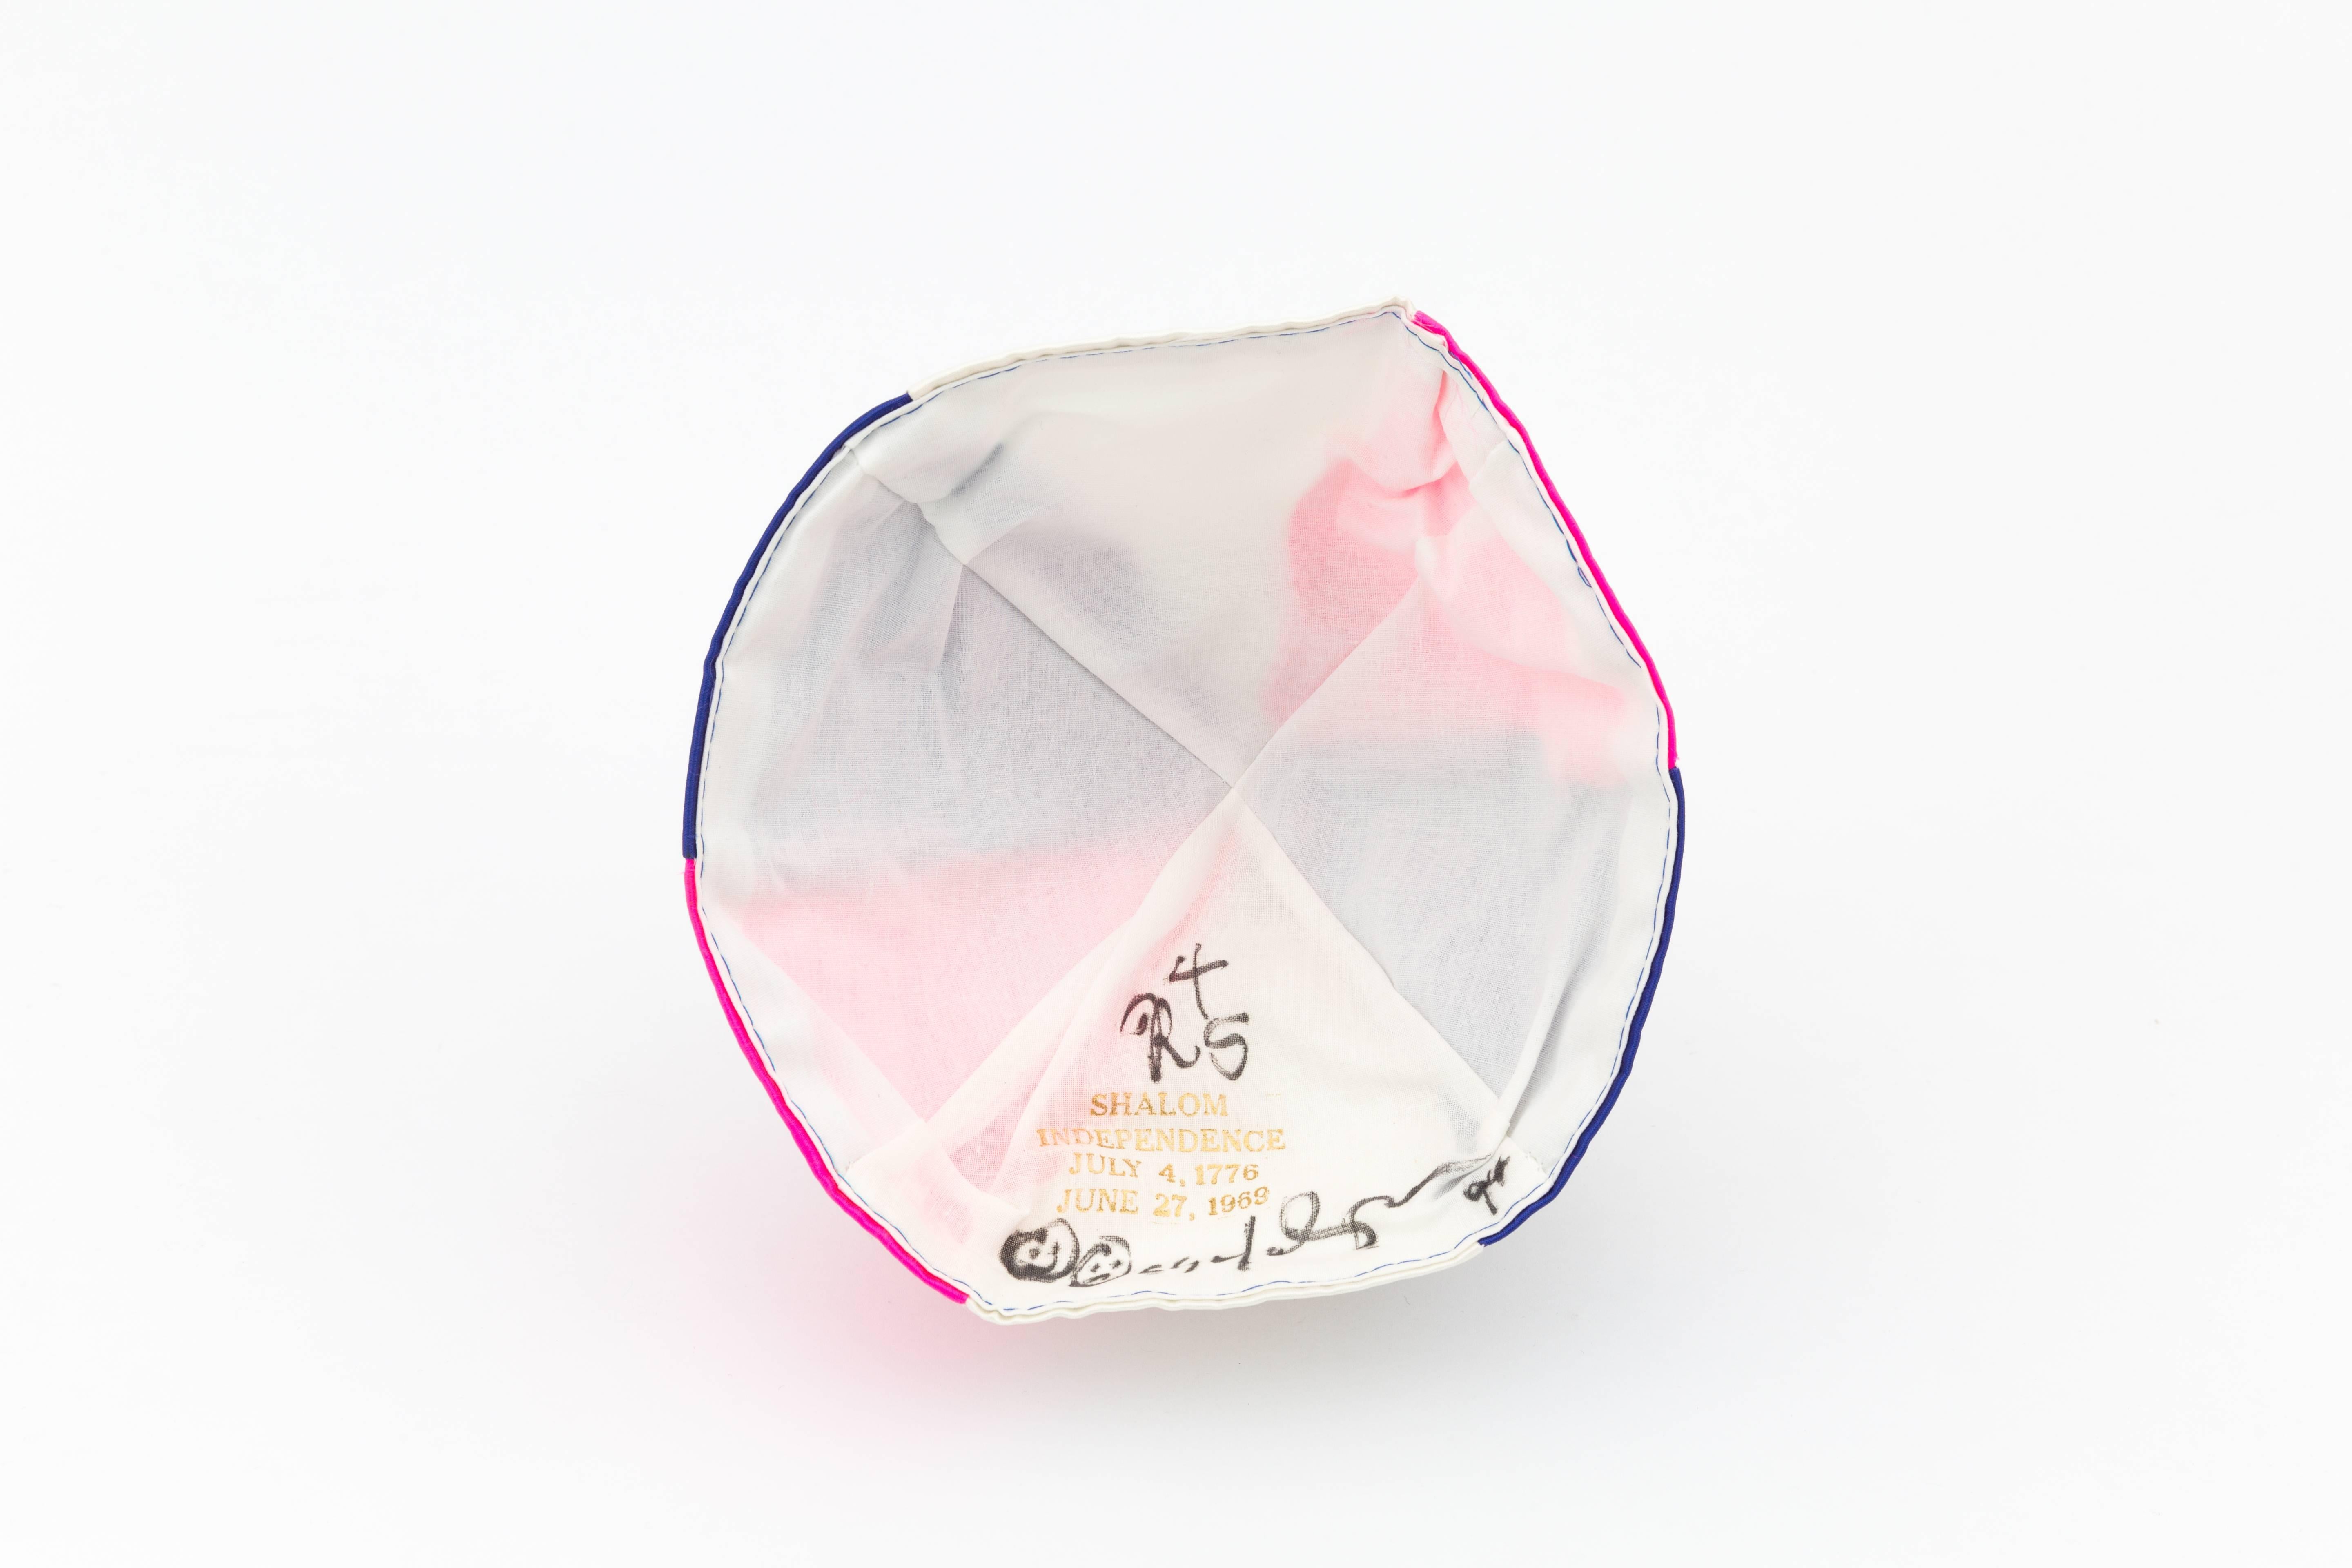 Stonewall Yarmulke (Shalom Independence: July 4, 1776-June 27, 1969), 1995
Satin yarmulke - pink, blue and white
Signed

For decades, Leibowitz has been the New York art world’s master painter of abjection and neuroses, with mockingly self-abasing